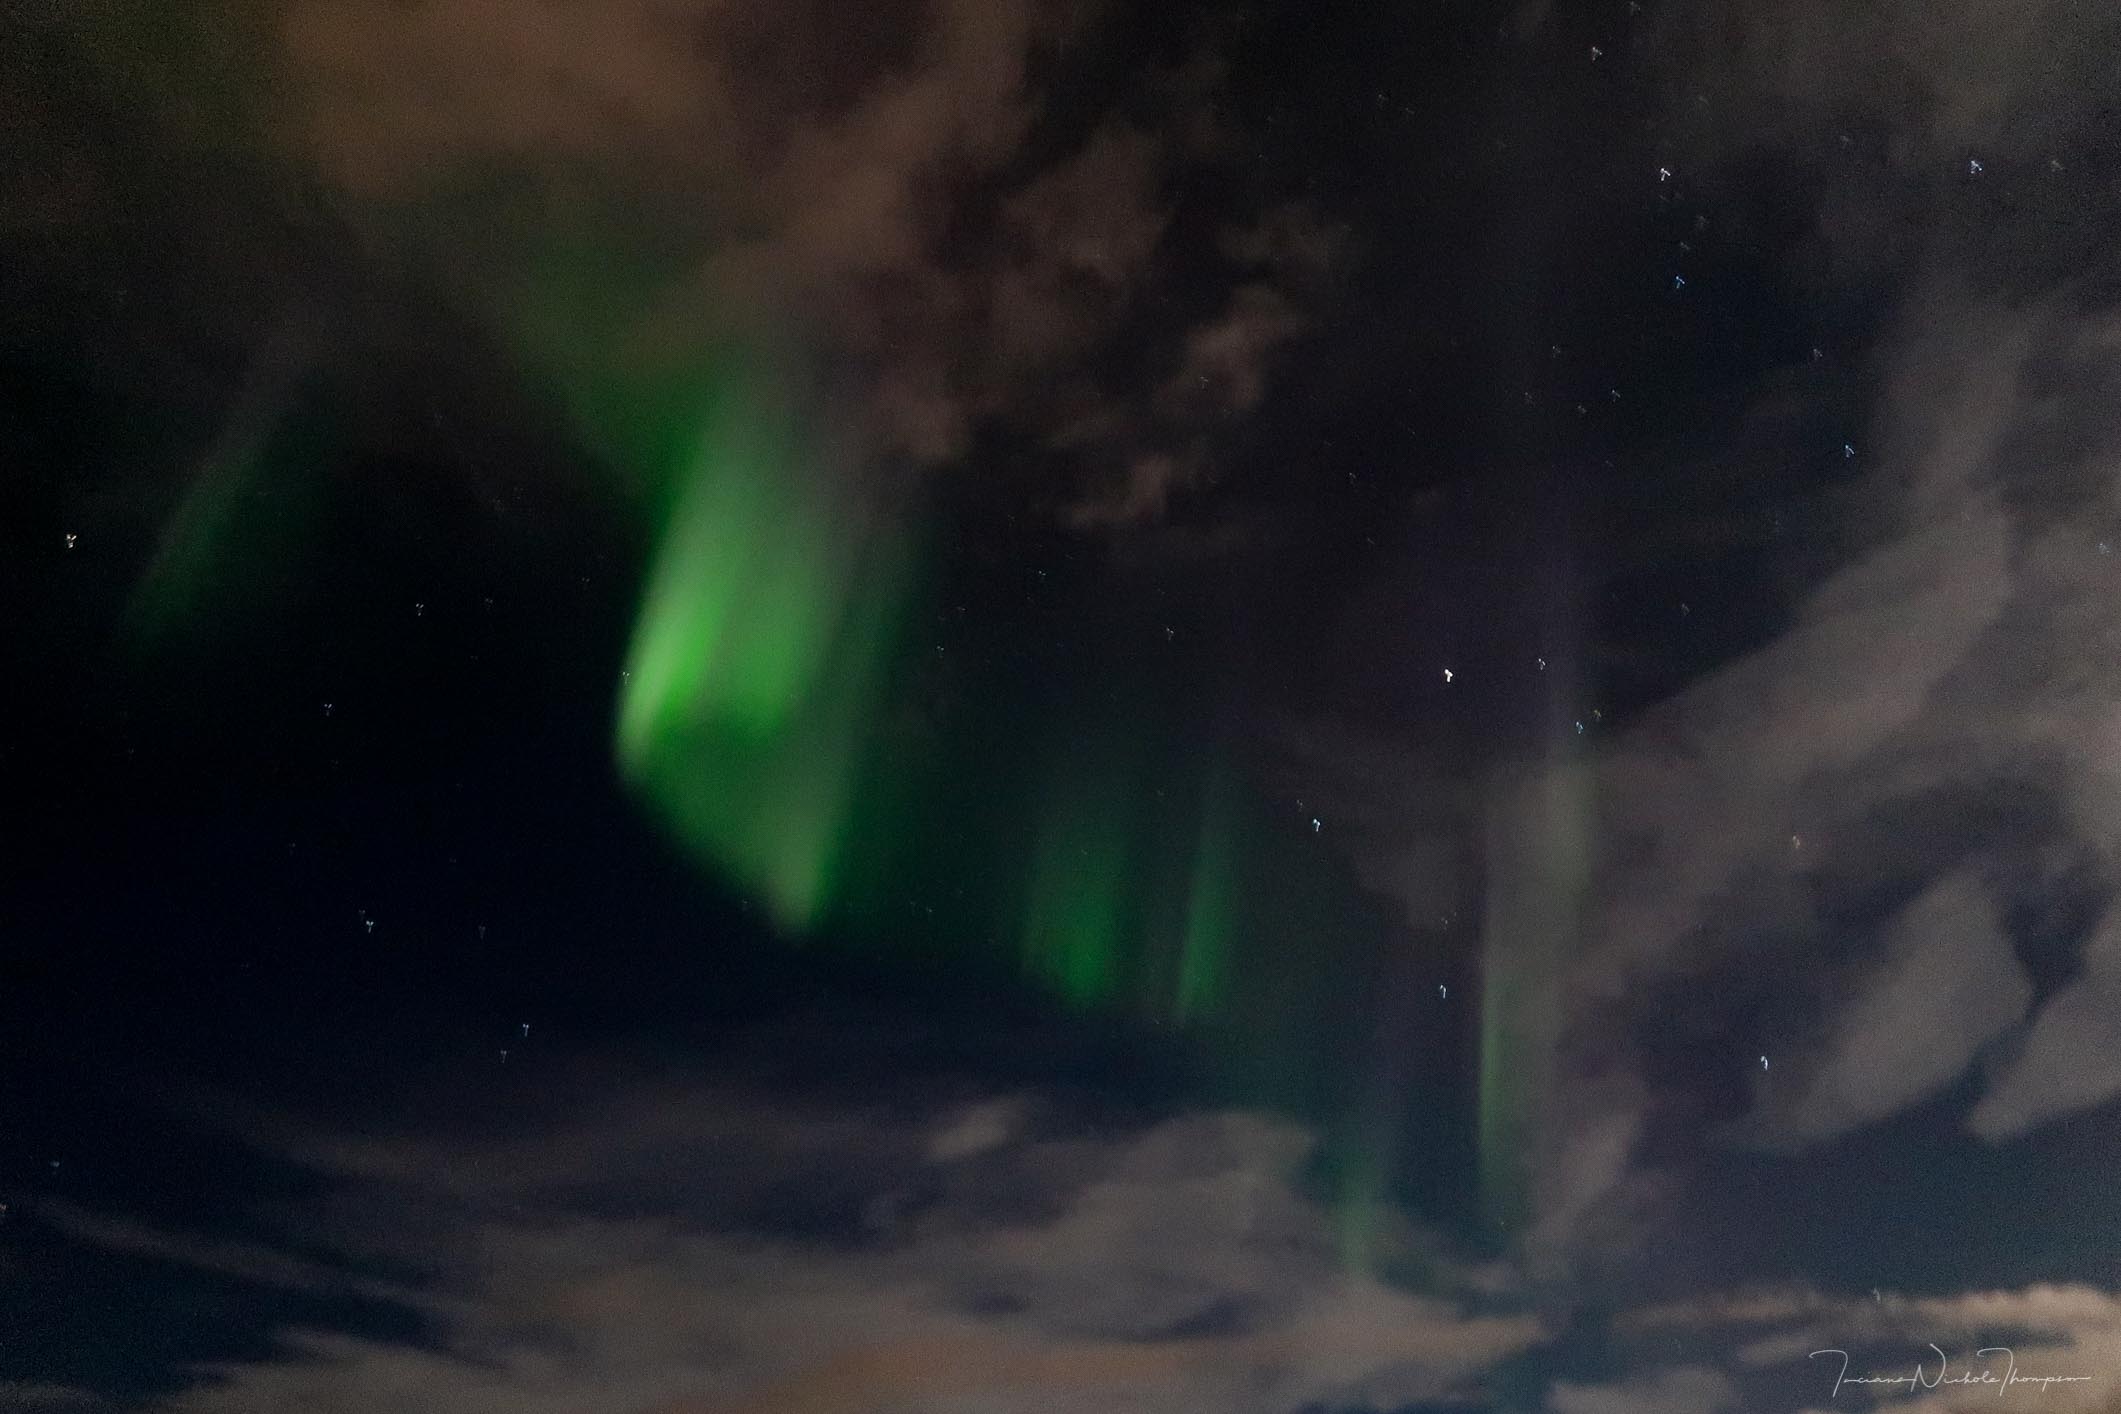 A small glimpse of the Northern Lights in iceland